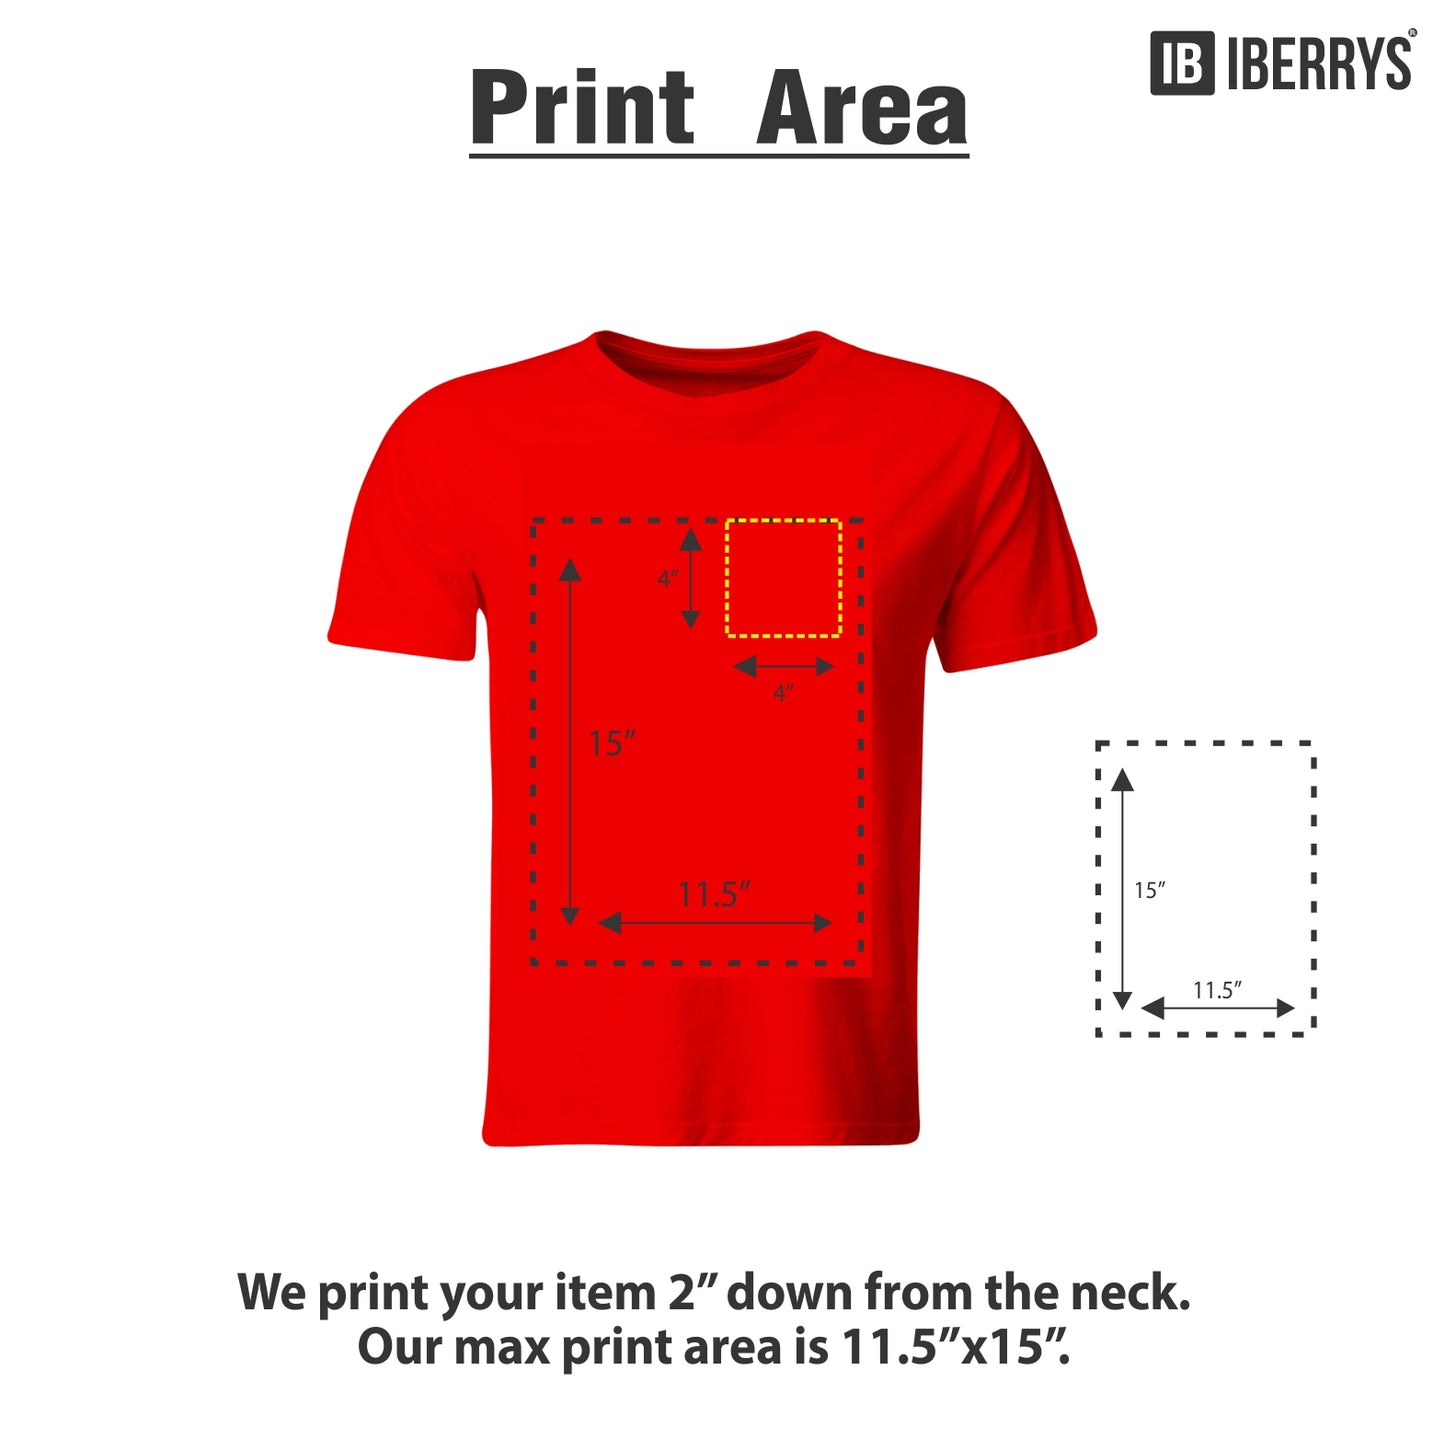  Personalized Cotton Printed Tshirts for Men Customized Round Neck Text Tshirt for Men-Red